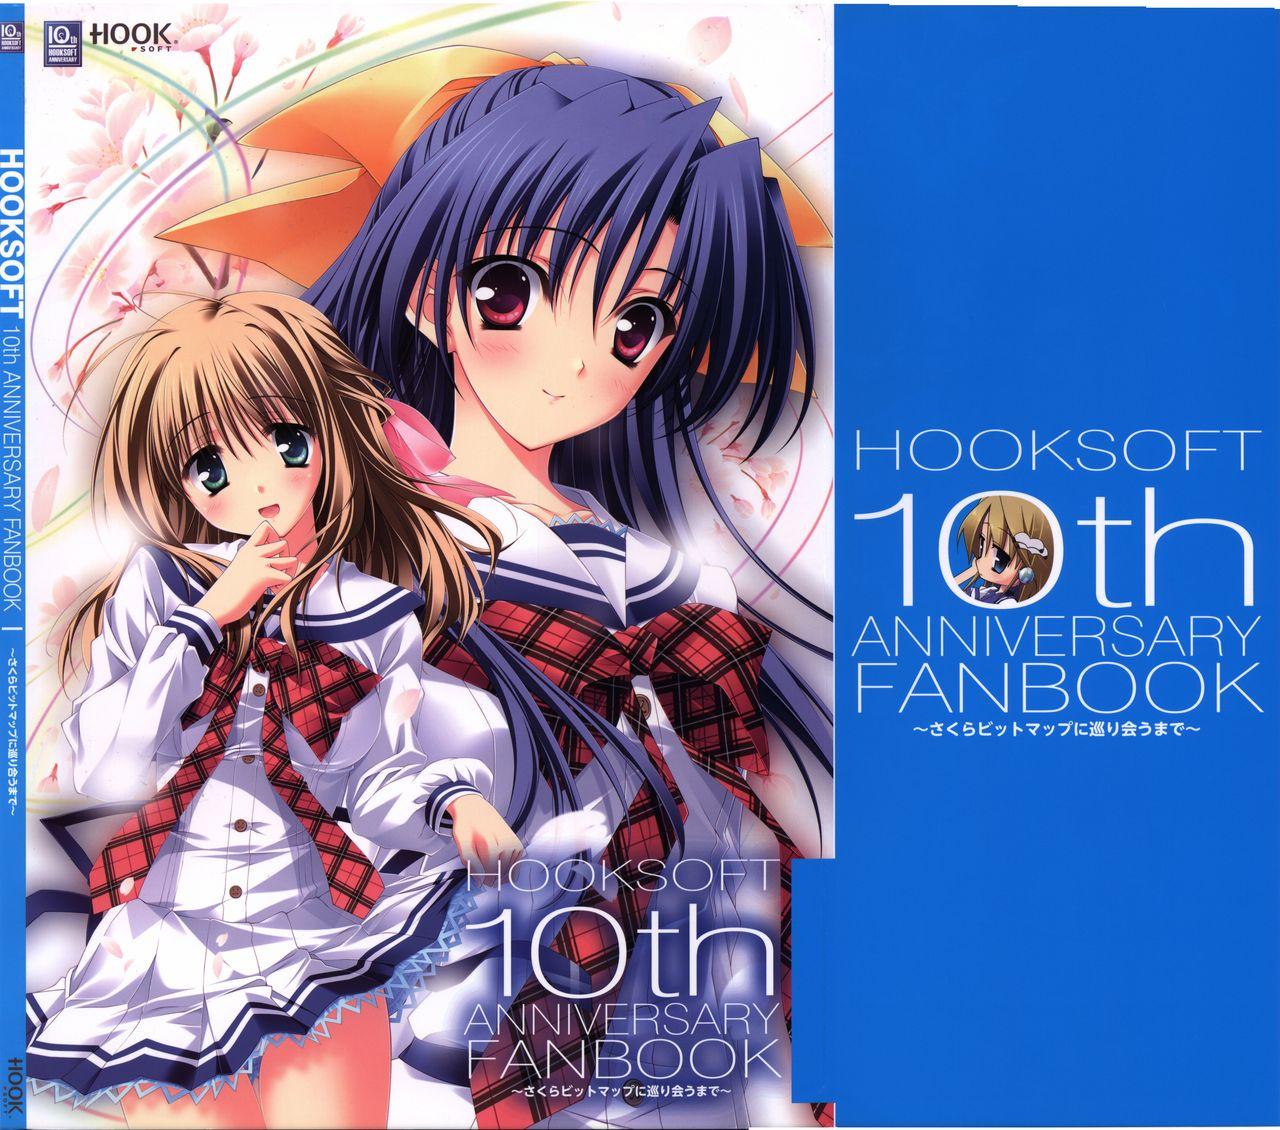 Maledom HOOKSOFT 10th ANNIVERSARY FANBOOK Daring - Picture 1